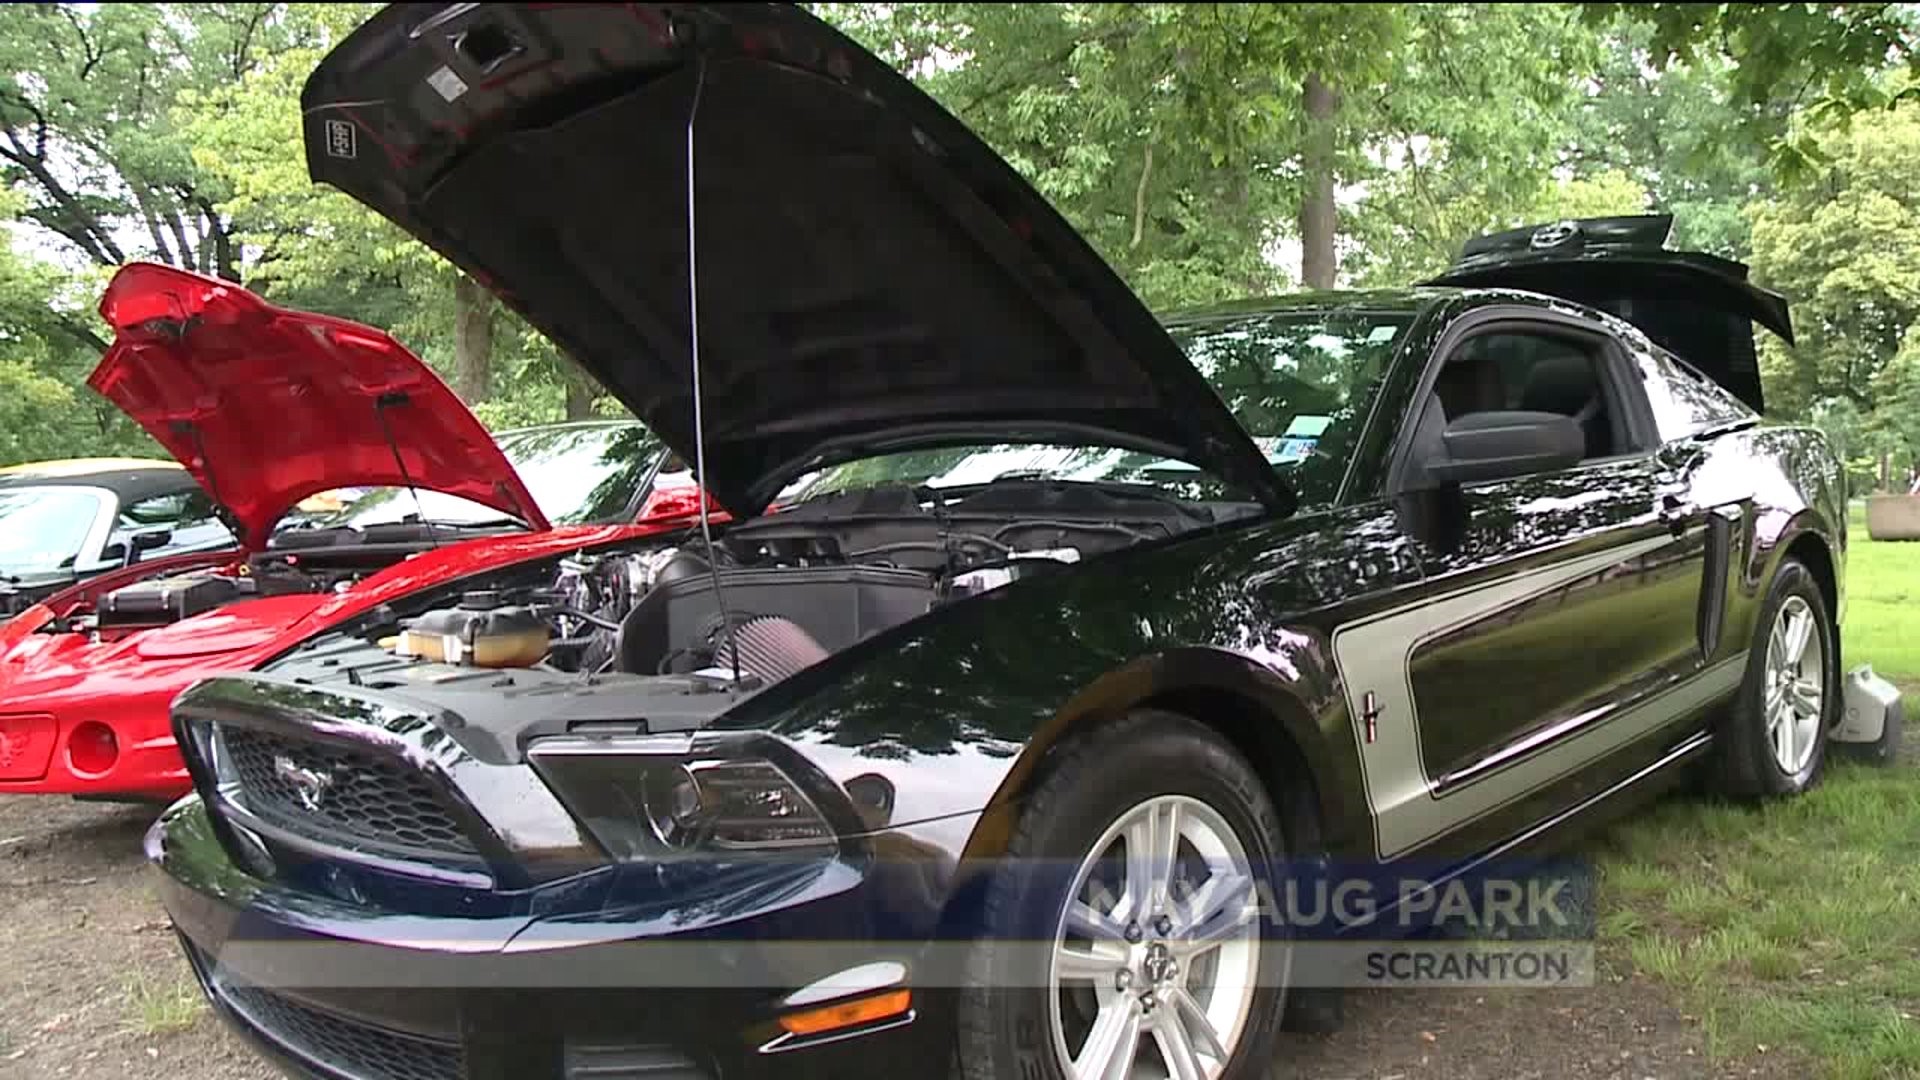 25th Annual Father`s Day Car Show at Nay Aug Park